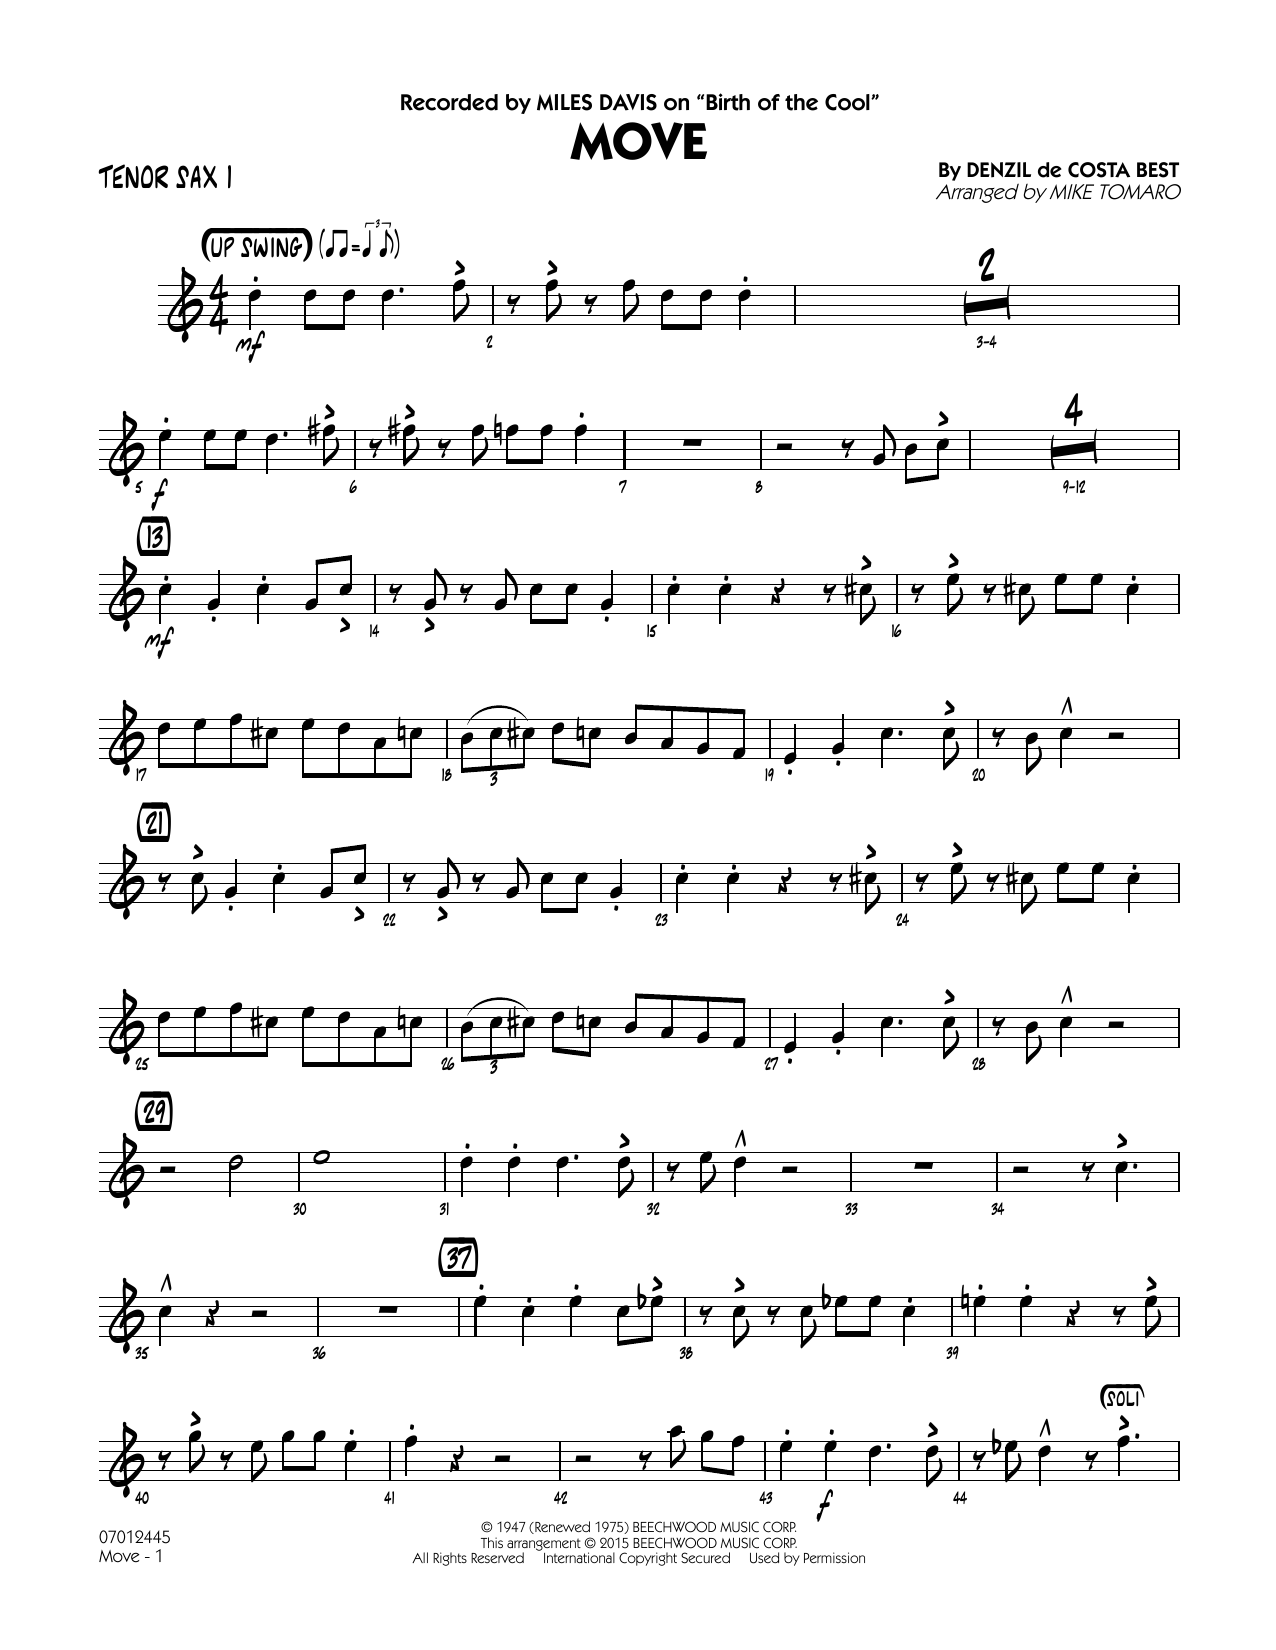 Mike Tomaro Move - Tenor Sax 1 sheet music notes and chords. Download Printable PDF.